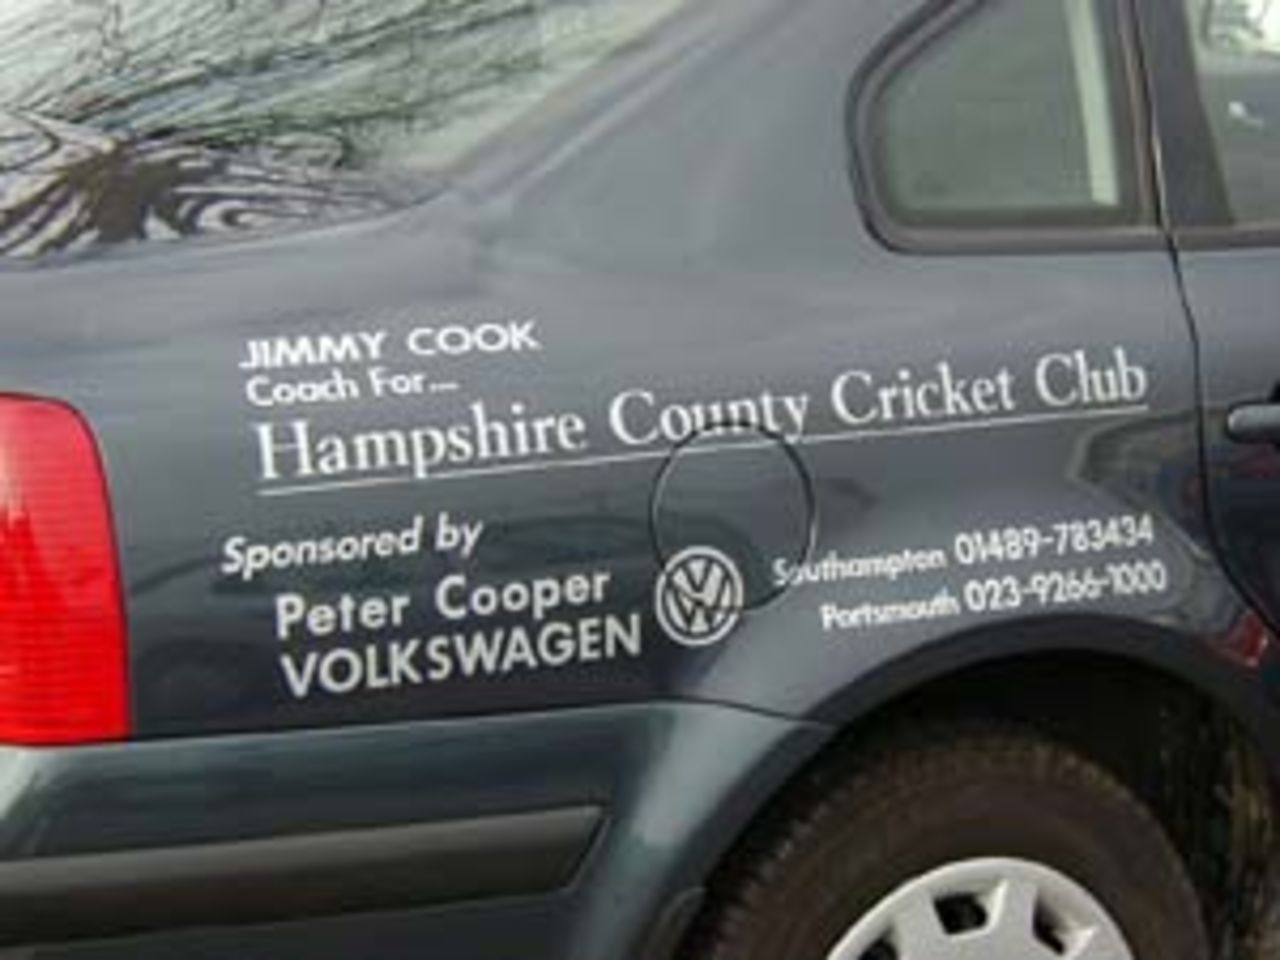 Jimmy Cook, Hampshire's new coach is given Sponsored Car